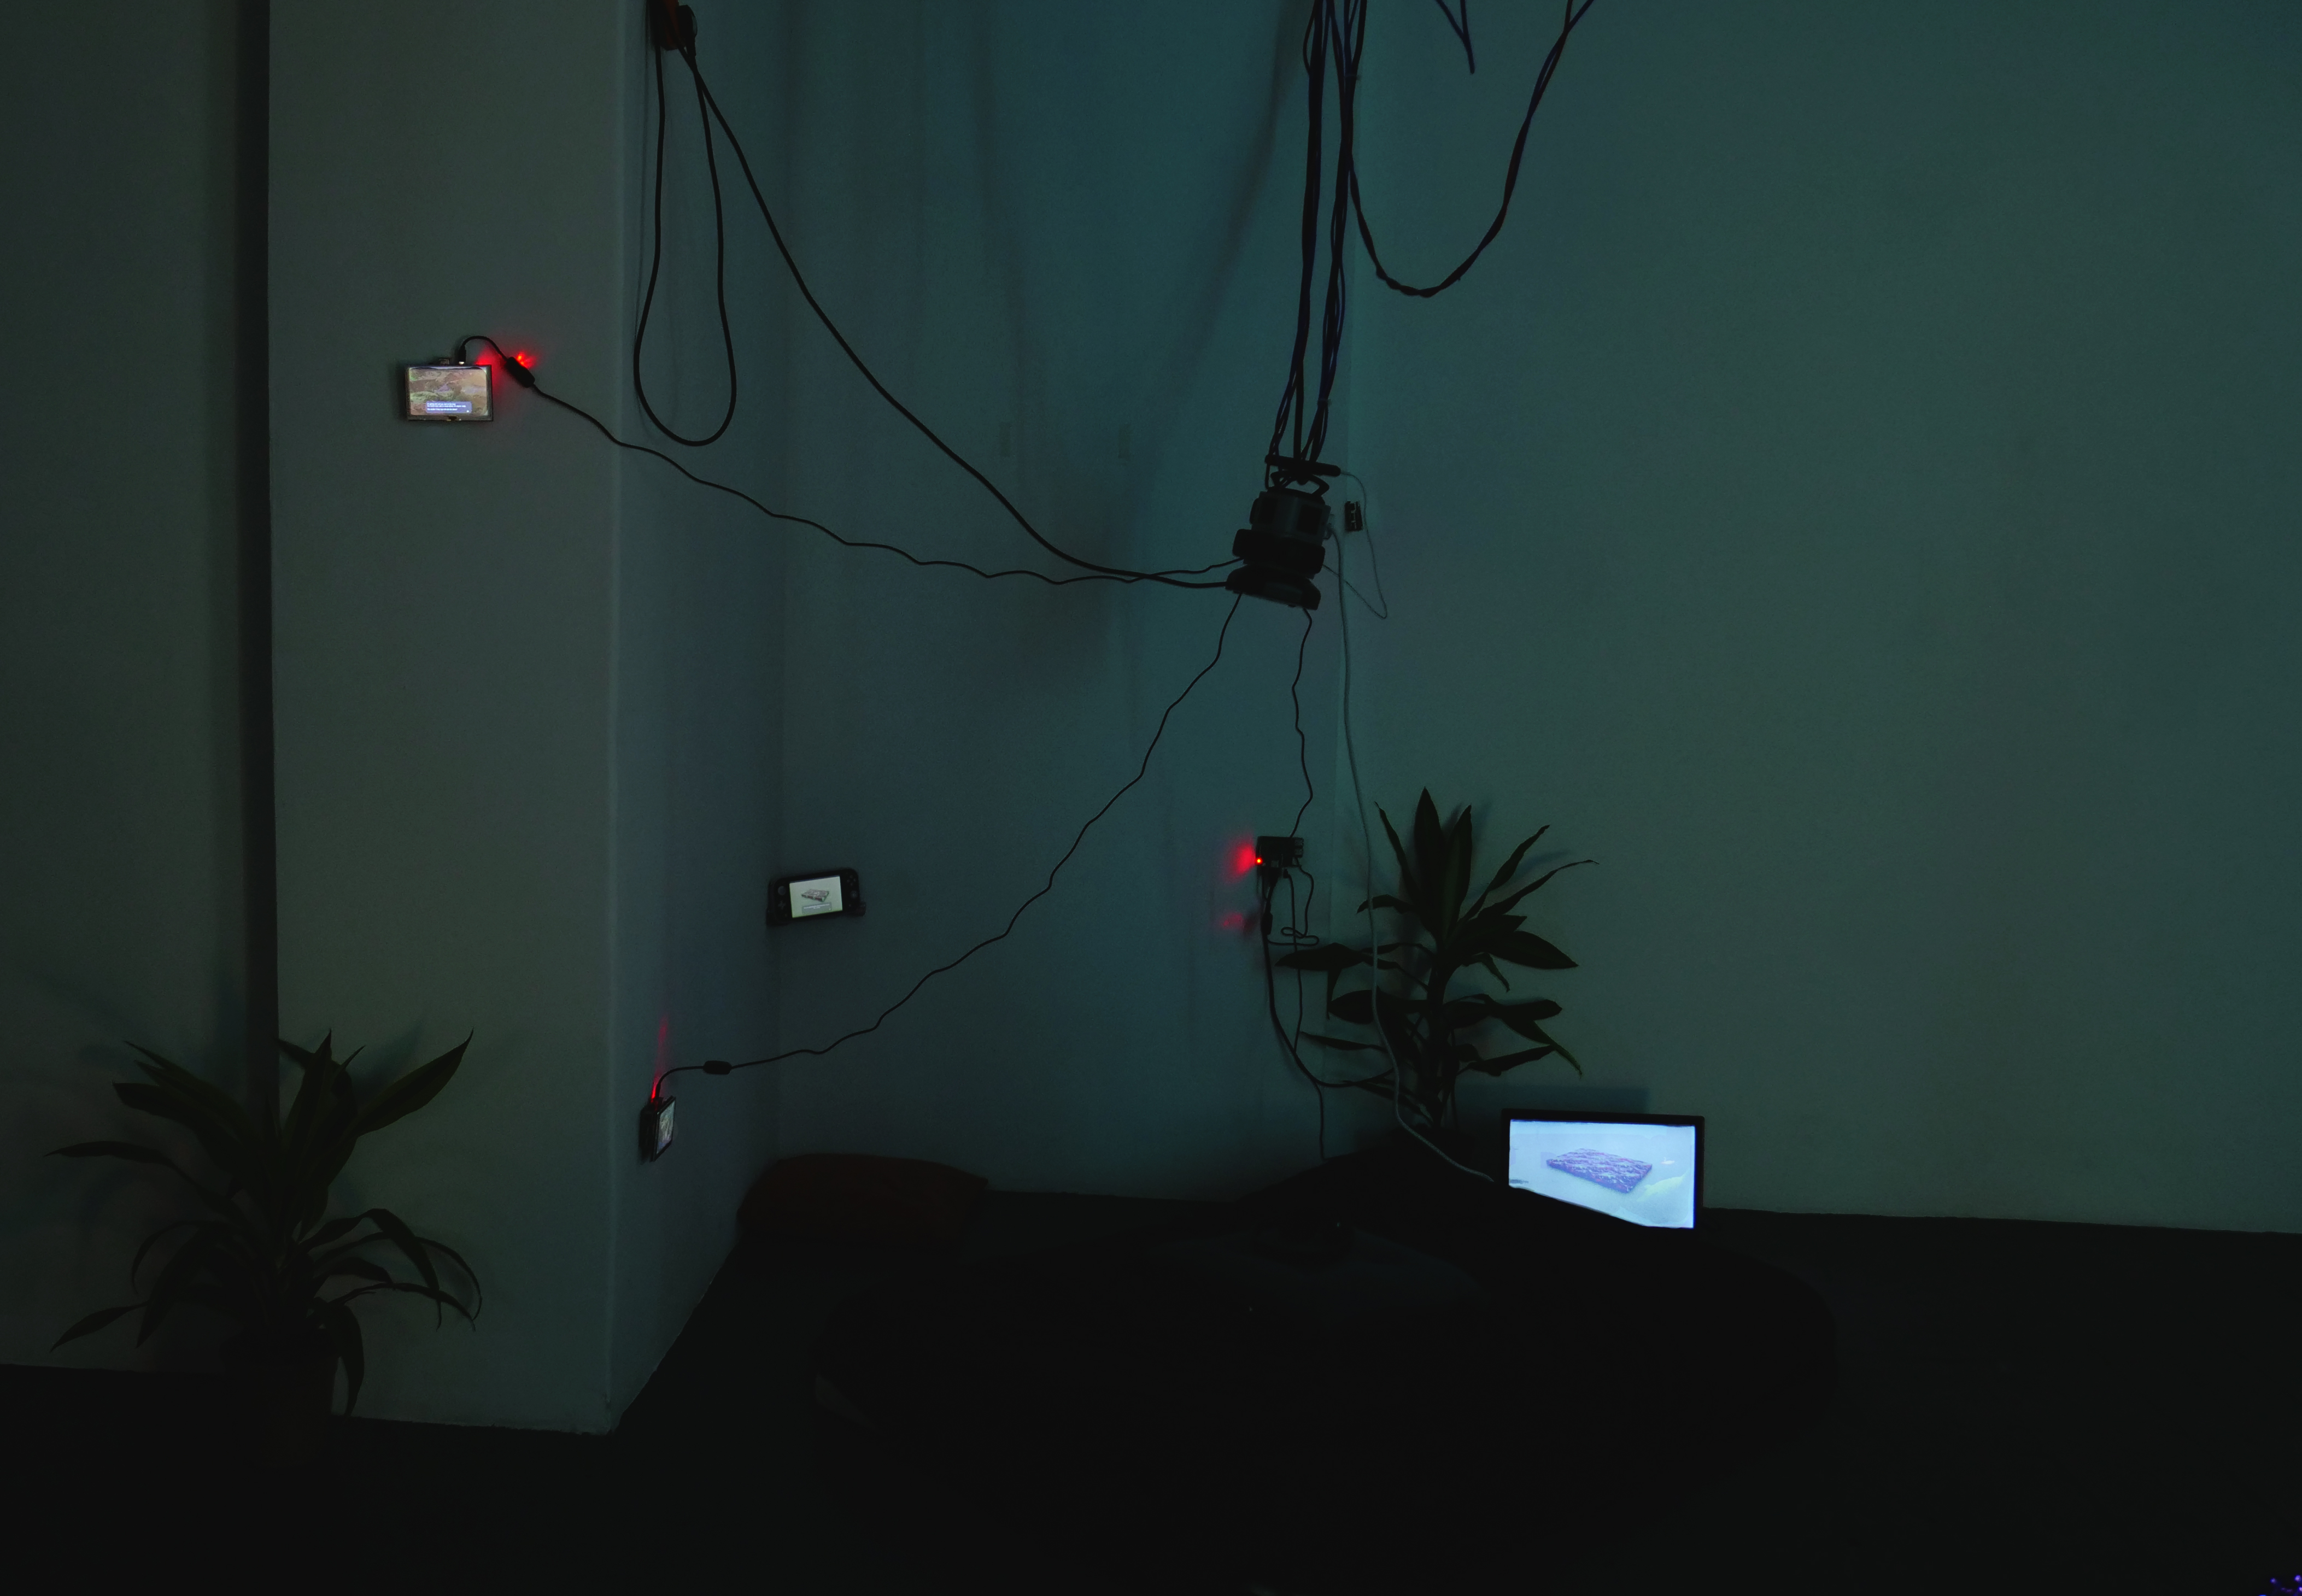 art installation in the corner between two walls, with plants on the left and right side of the walls on the floor, four small screens on the walls and cables connecting to a power bank hanging from the ceiling in the middle